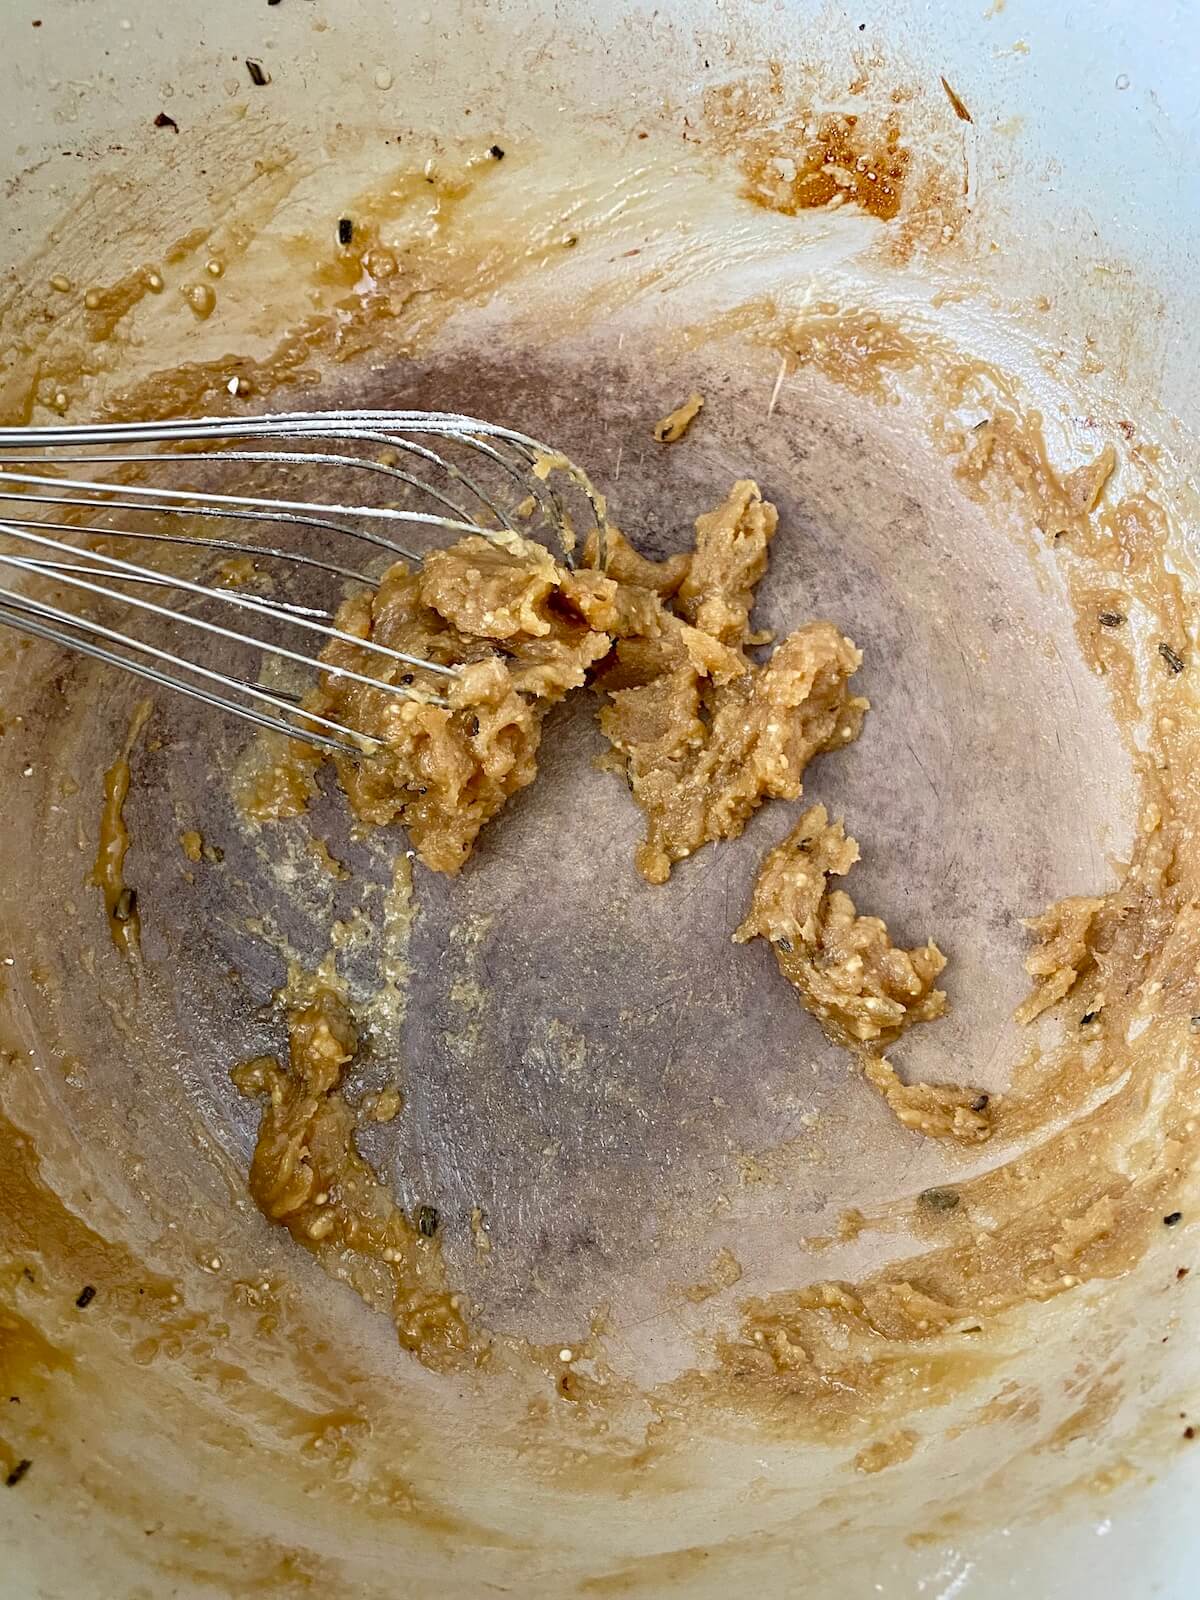 A roux made from the braising liquid and flour being whisked in the bottom of a dutch oven.